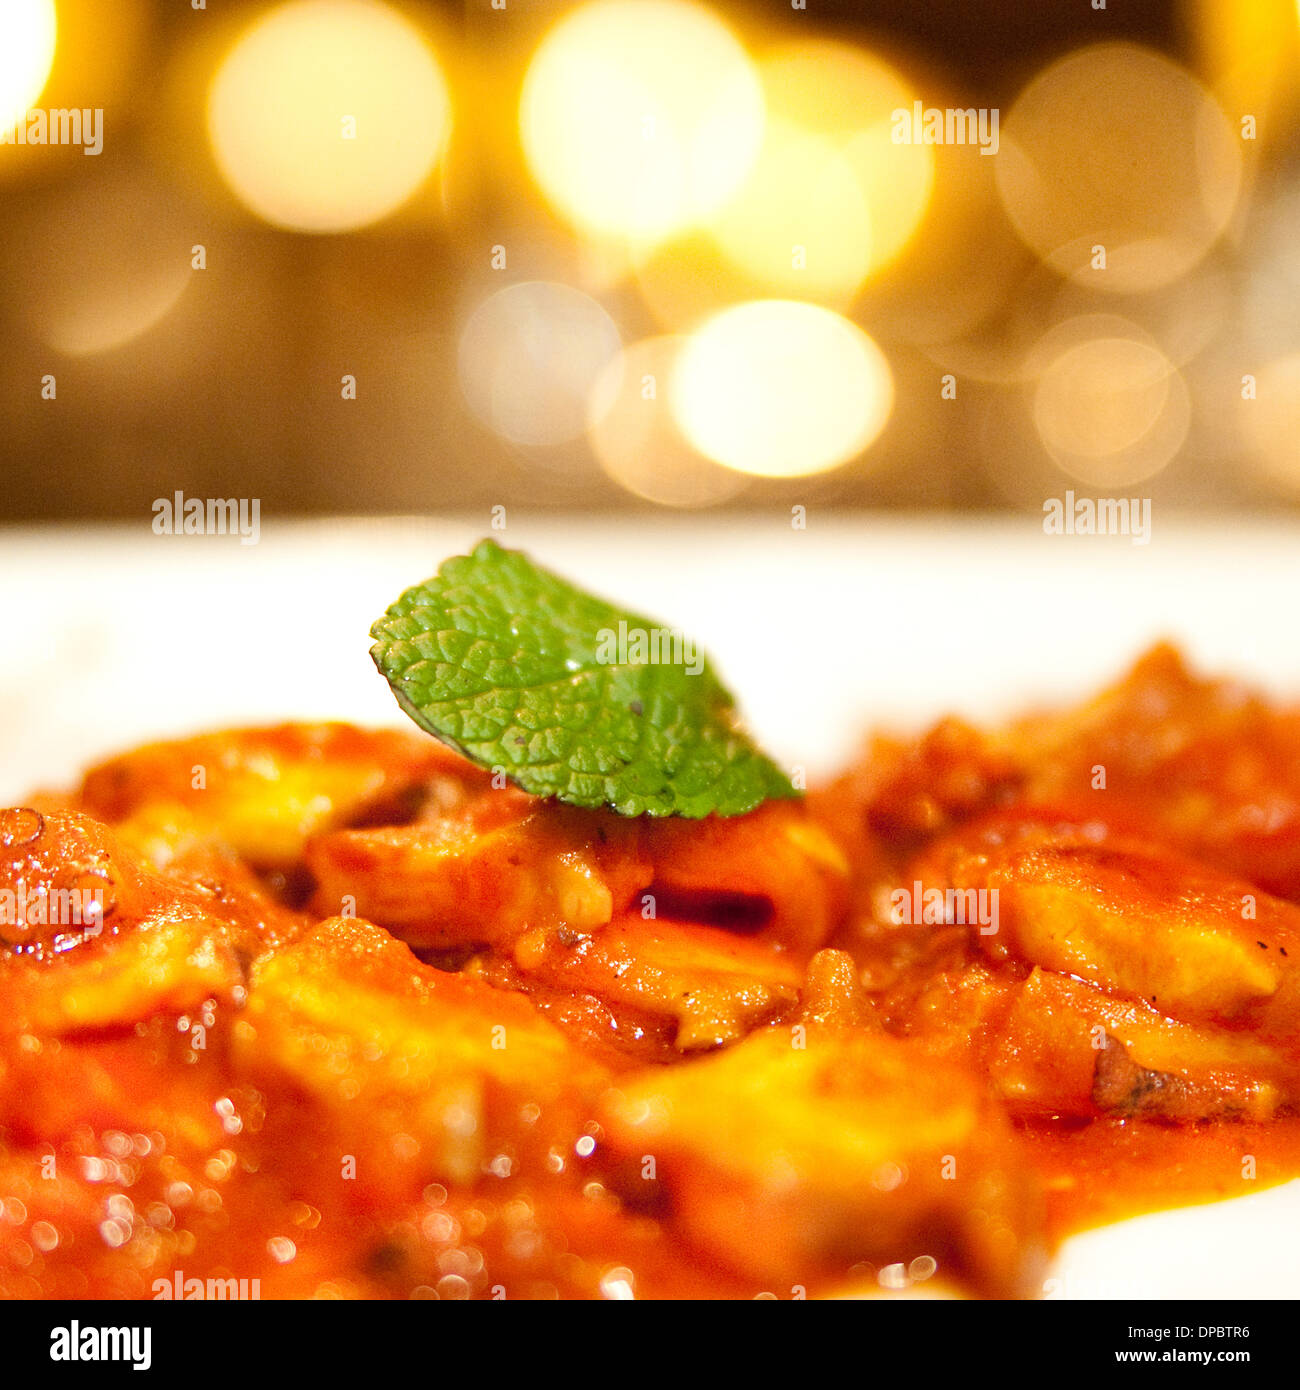 Homemade pasta with tomato sauce and mint on top. Stock Photo